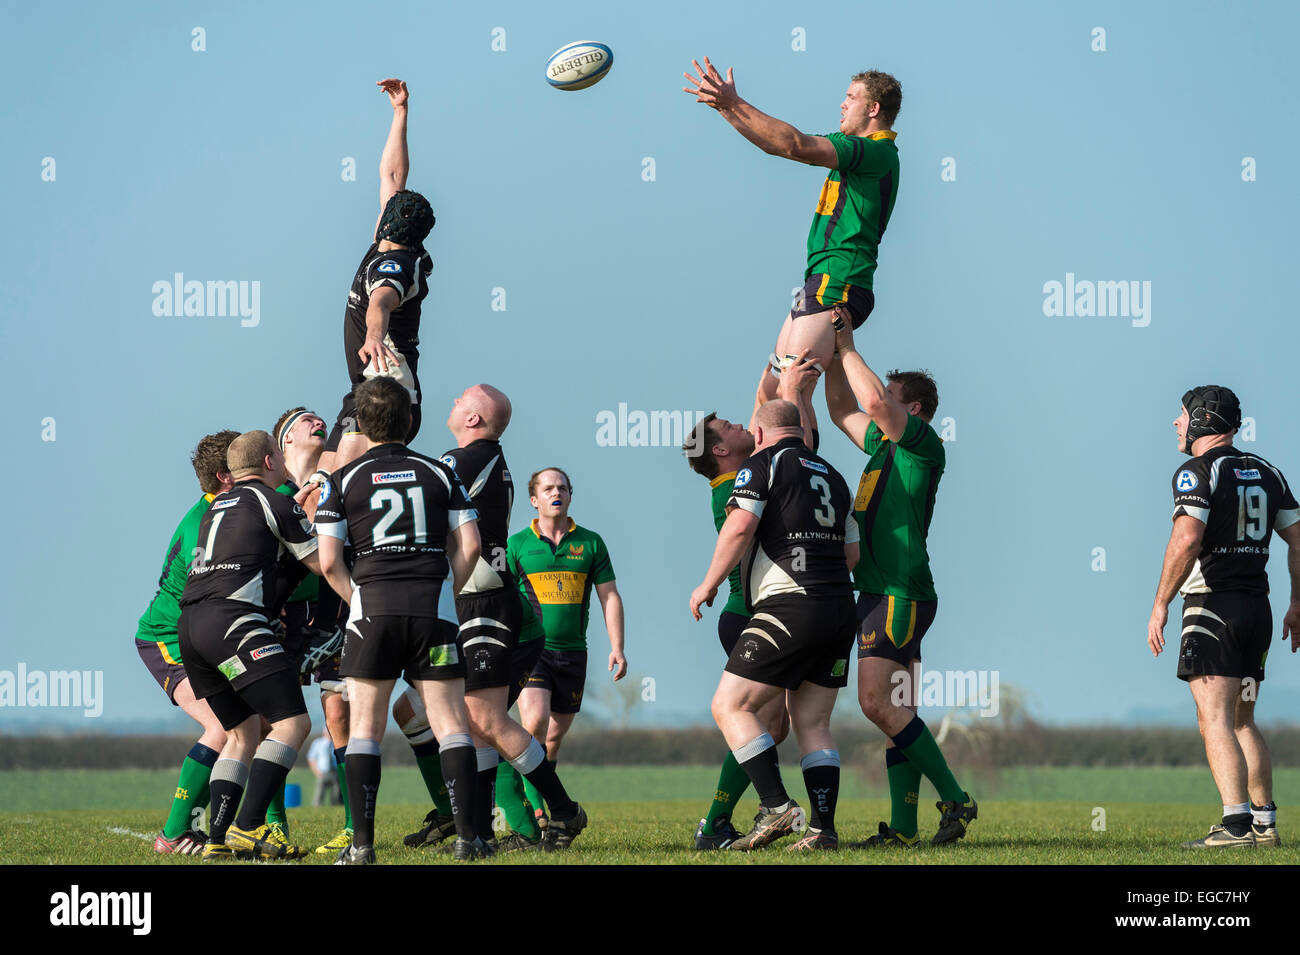 Rugby line out, players in action Stock Photo